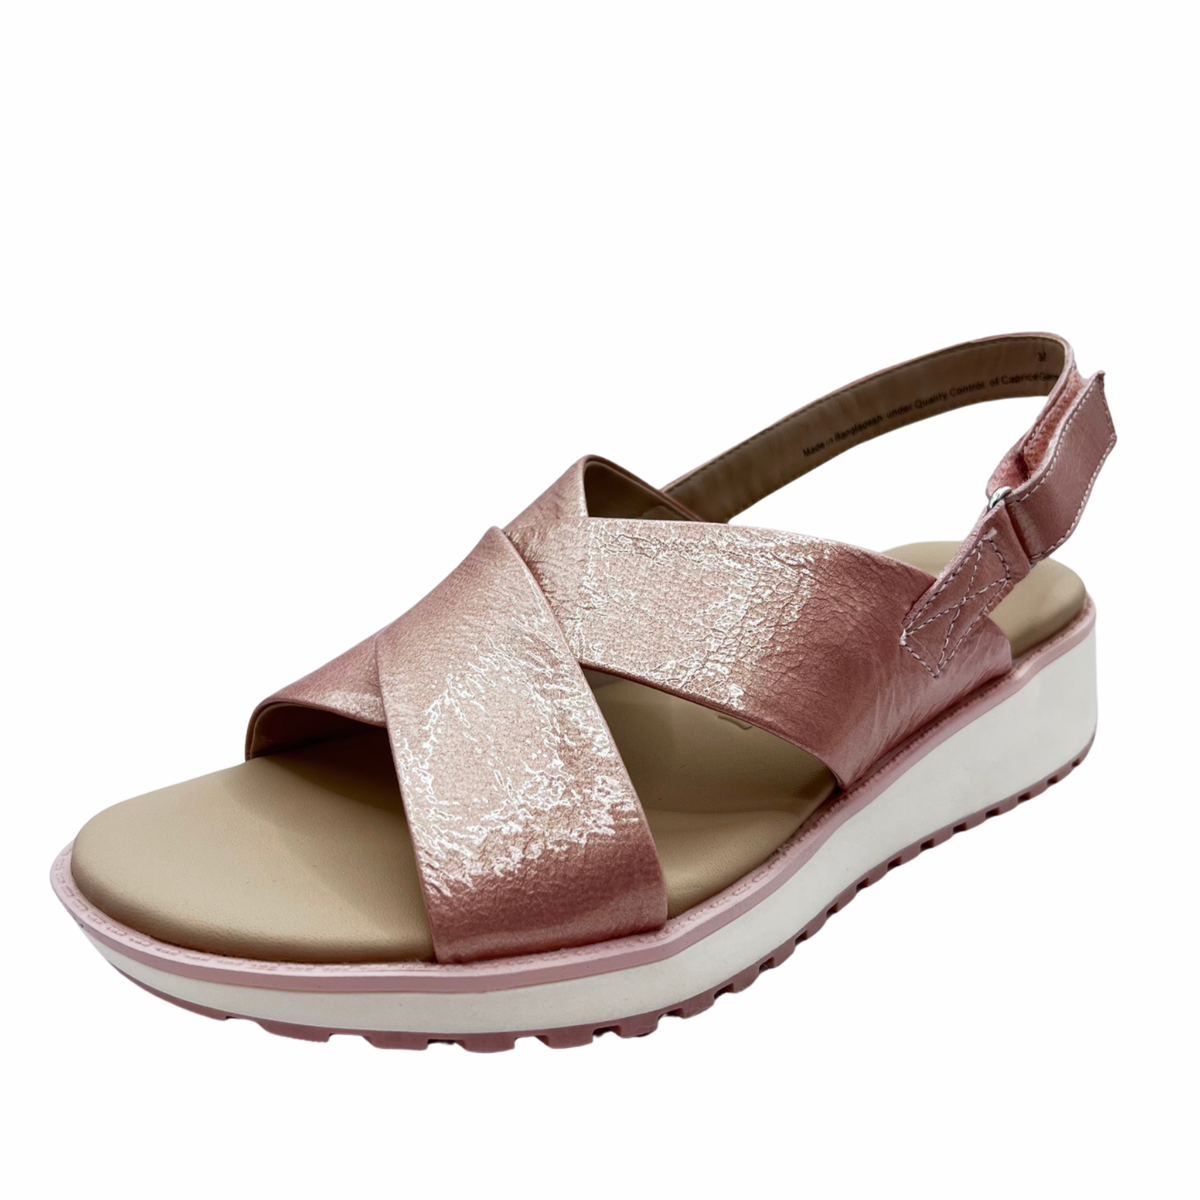 Caprice Pink Patent Leather Crossover low wedge Sandal